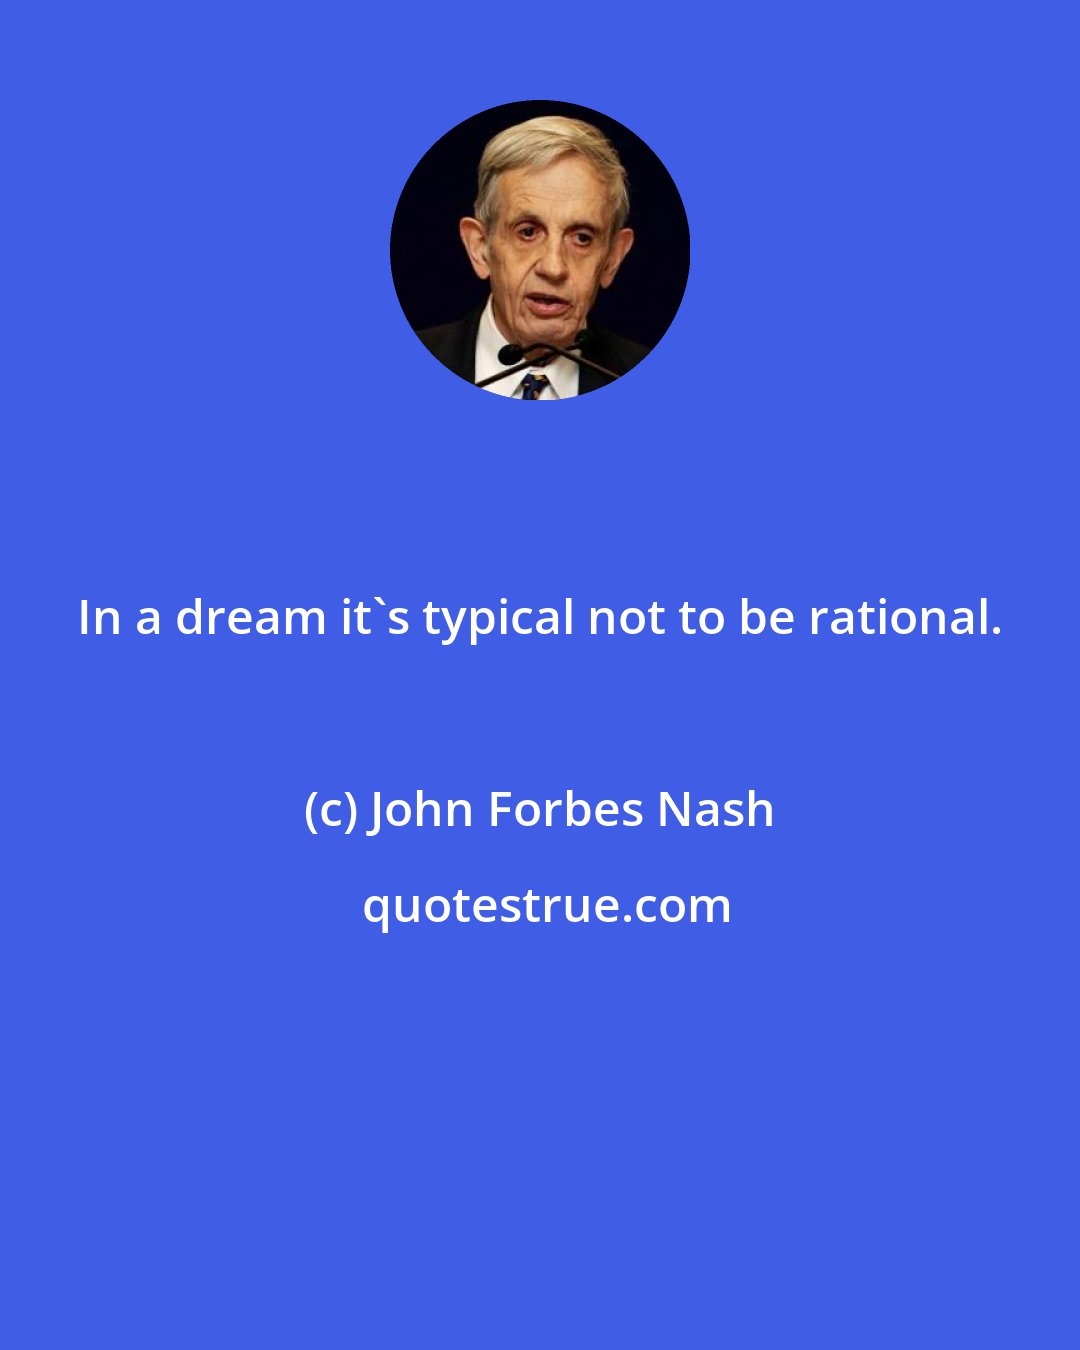 John Forbes Nash: In a dream it's typical not to be rational.